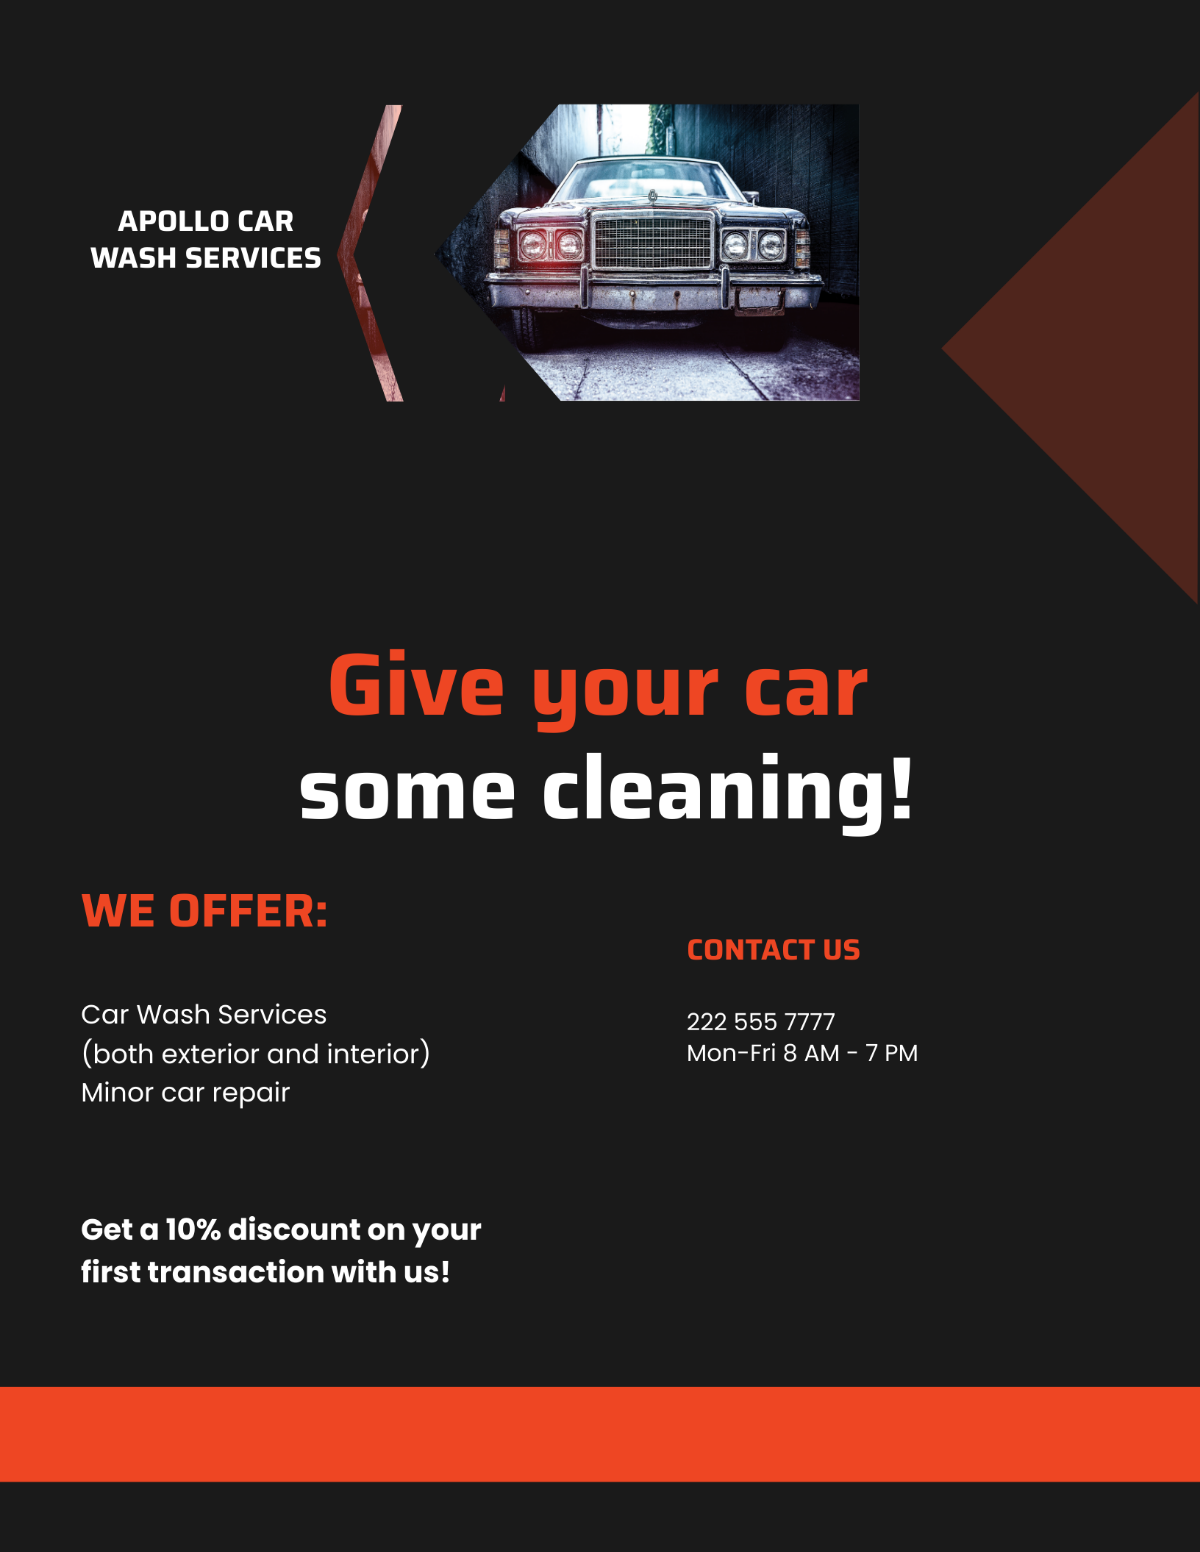 Car Wash Business Flyer Template